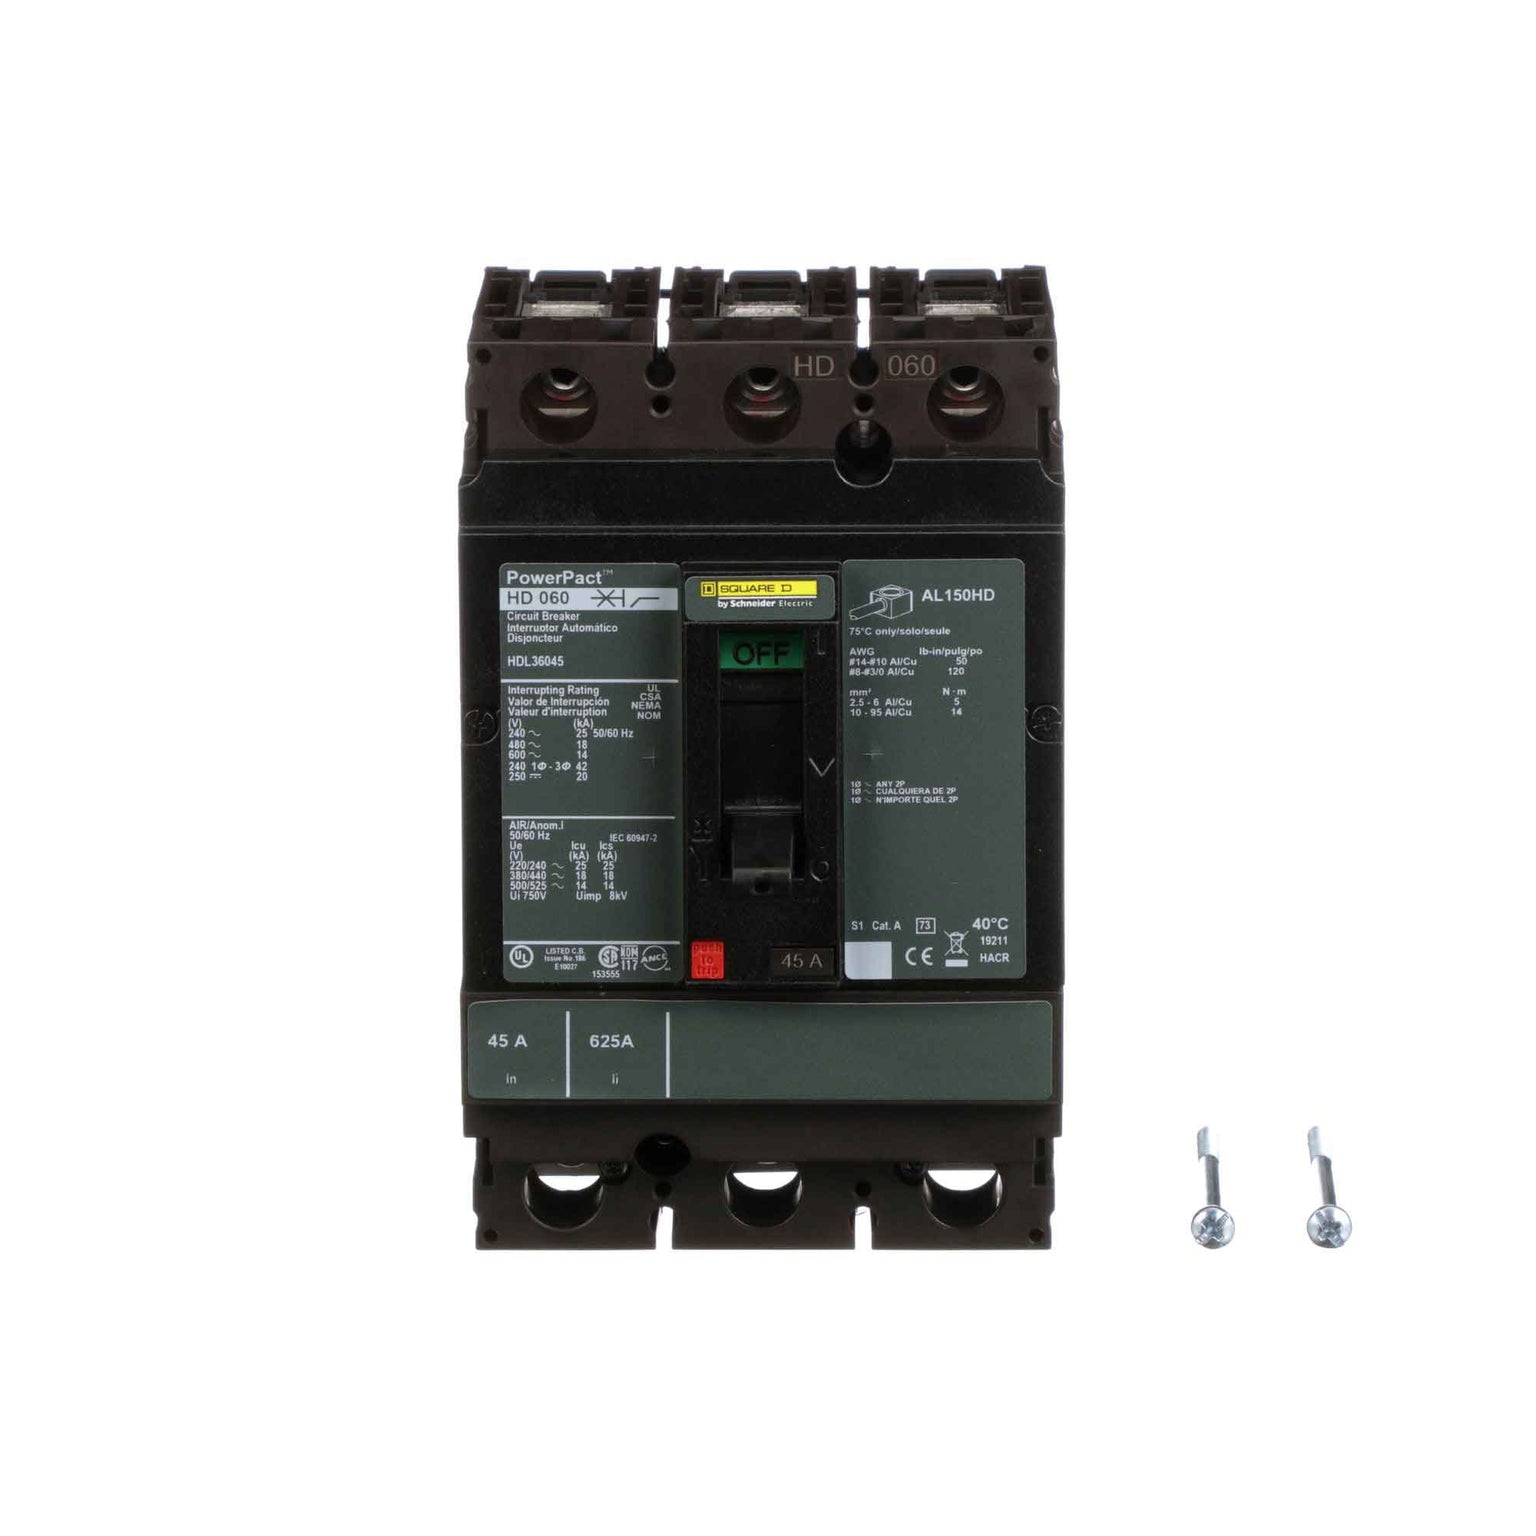 HDL36045 - Square D - Molded Case Circuit Breakers